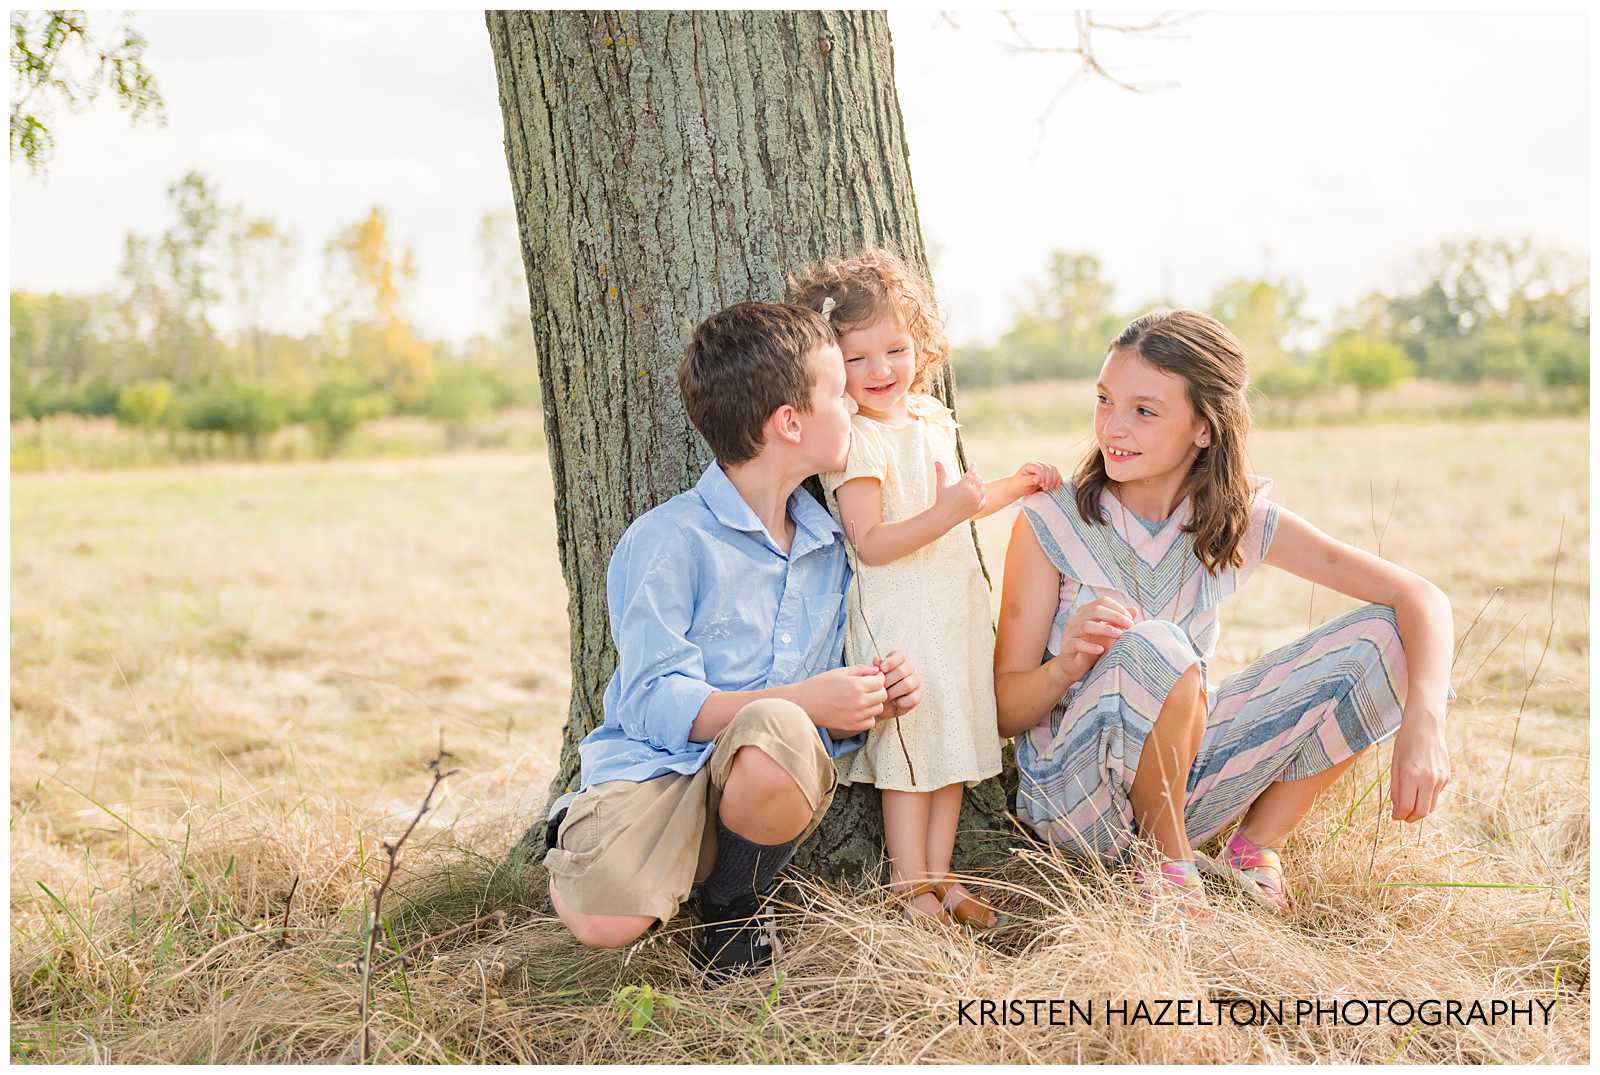 Three young siblings leaning against a tree